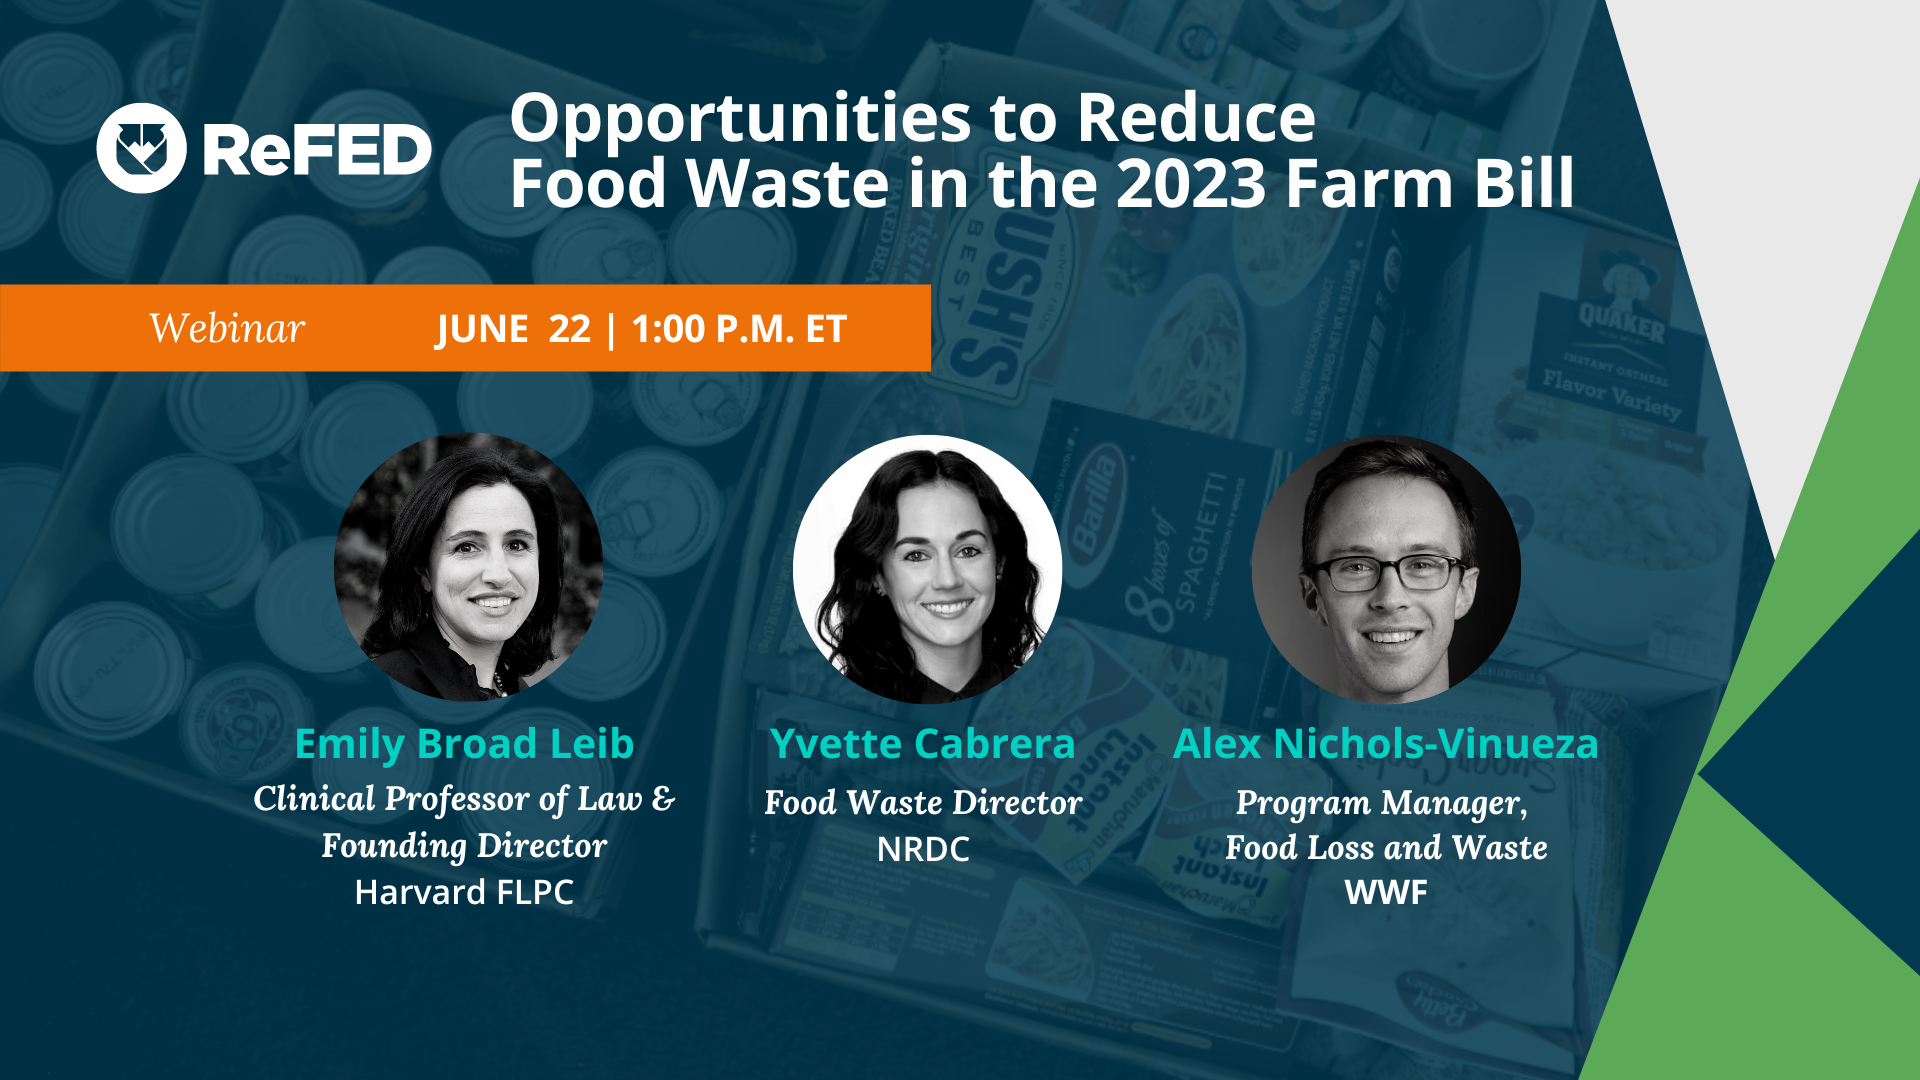 Title of webinar "Opportunities to Reduce Food Waste in the 2023 Farm Bill" with pictures of speakers.